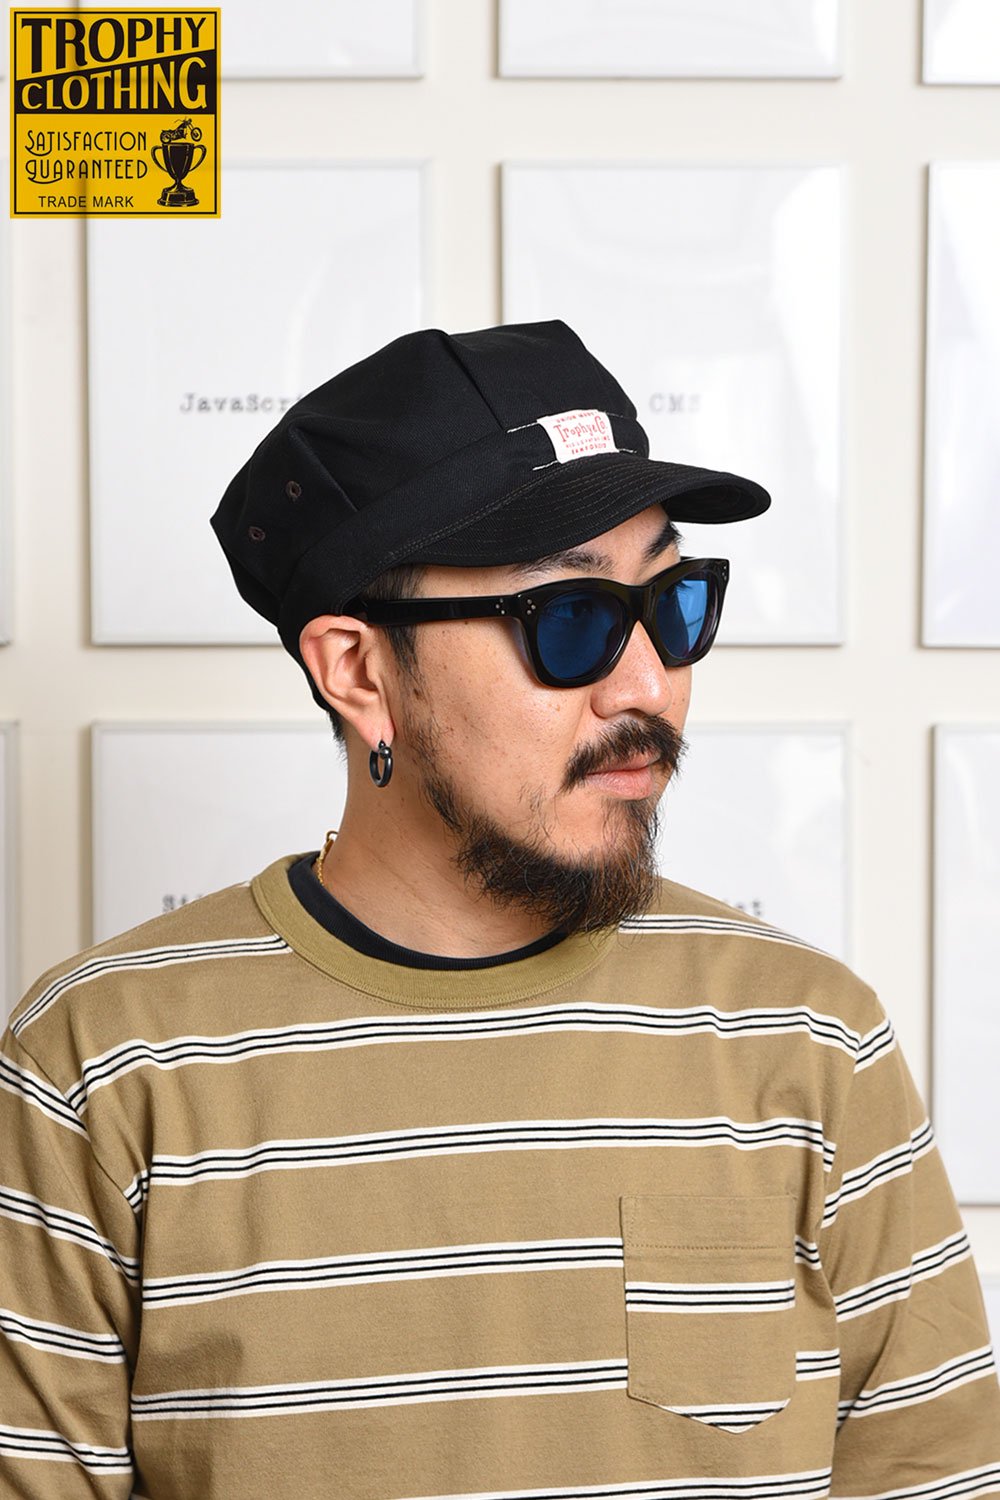 TROPHY CLOTHING(トロフィークロージング) レイルローダーキャップ UNION RAIL ROADER CAP TR21SS-702  通販正規取扱 | ハーレムストア公式通販サイト